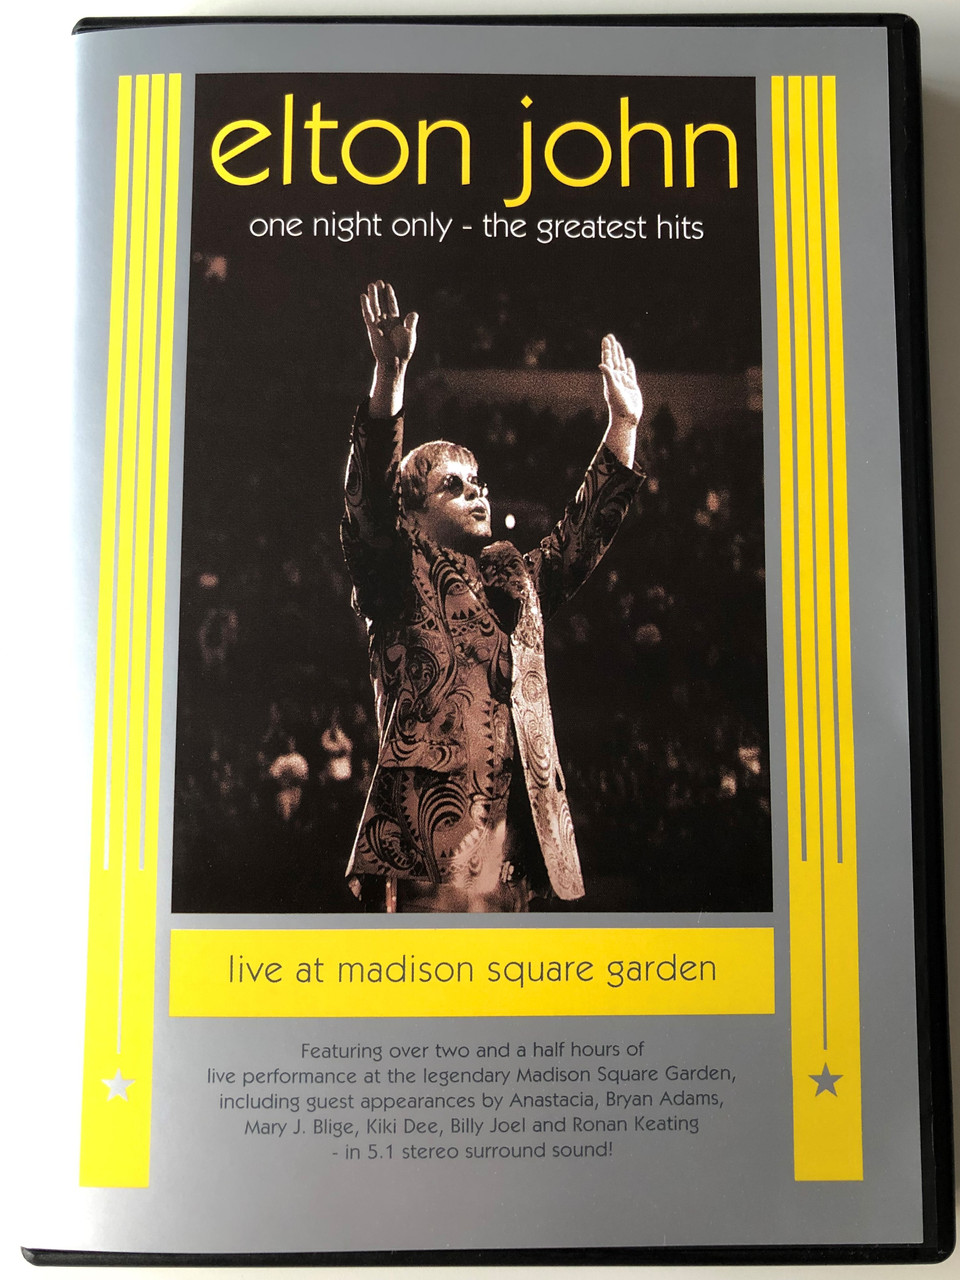 Elton John - One night only DVD 2001 The Greatest hits - Live at Madison  Square Garden / Directed by David Mallet / Mercury Records -  bibleinmylanguage